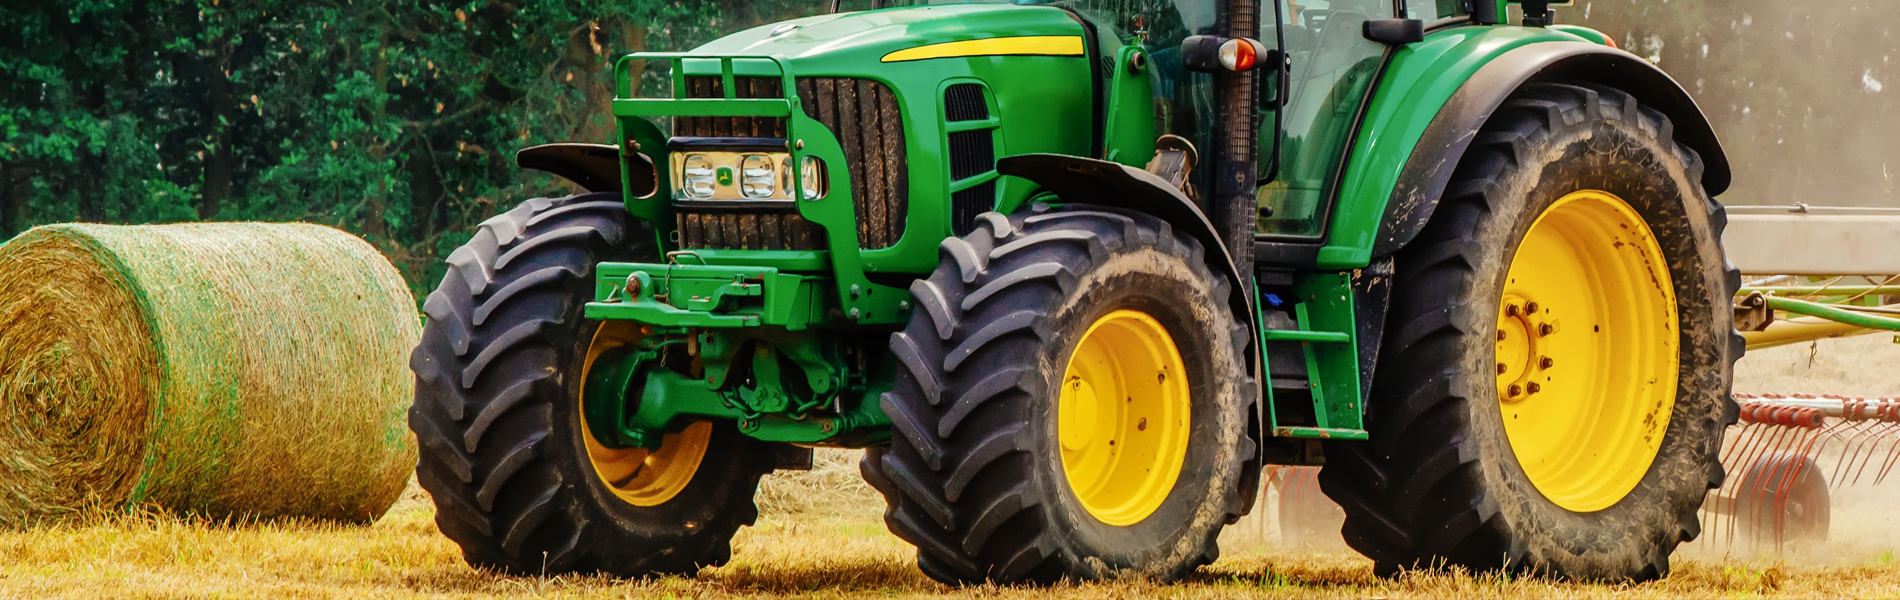 banner_agriculture_tyres